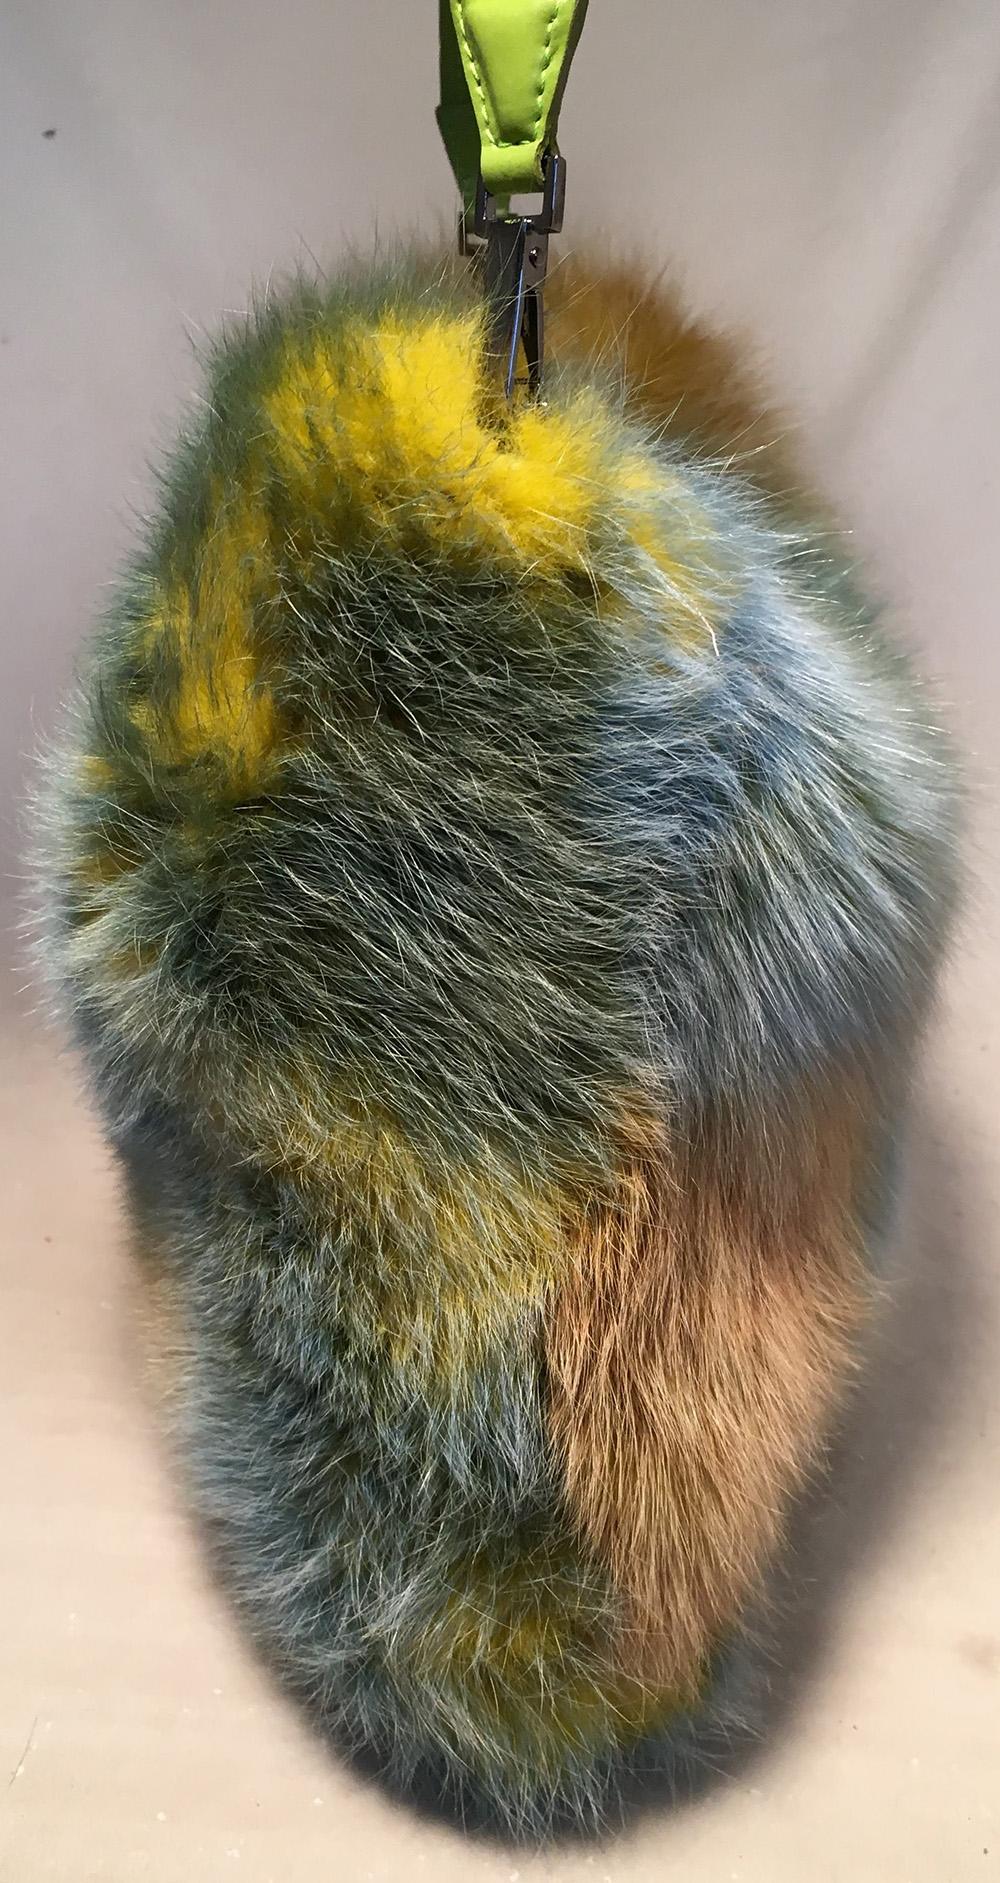 RARE Givenchy Vintage Multicolor Green Mink Fur Convertible Handbag Clutch in excellent condition. Multicolor mink fur in green, blue, light tan, and yellow trimmed with a green leather handle and gunmetal hardware. Top snap closure opens to a plaid